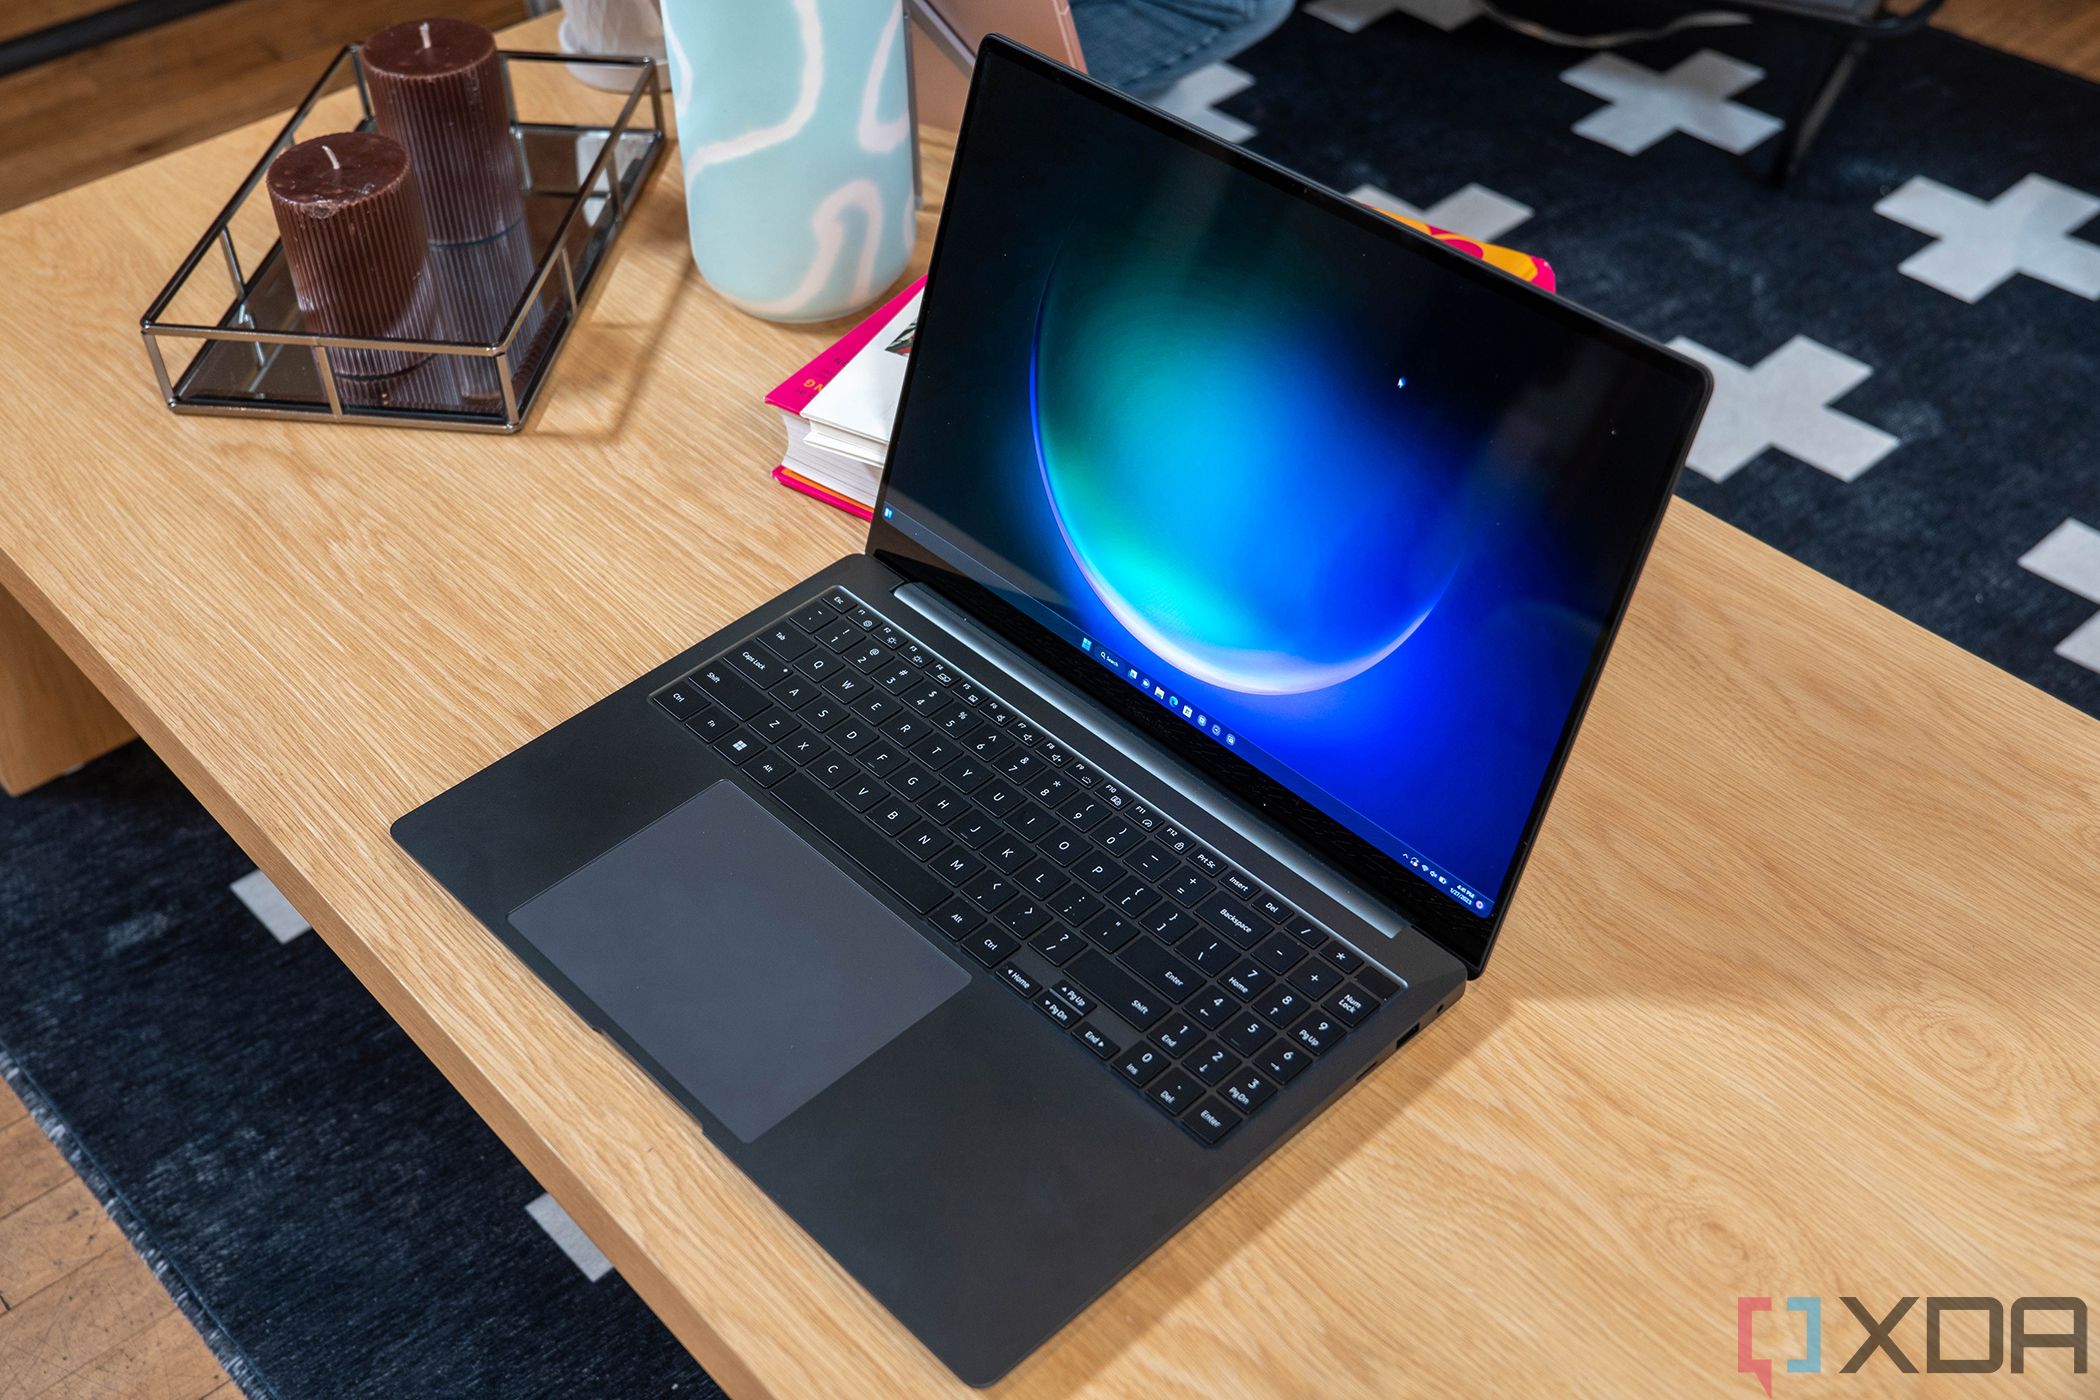 Samsung's Galaxy Book 3 Lineup Offers a Laptop for Everyone